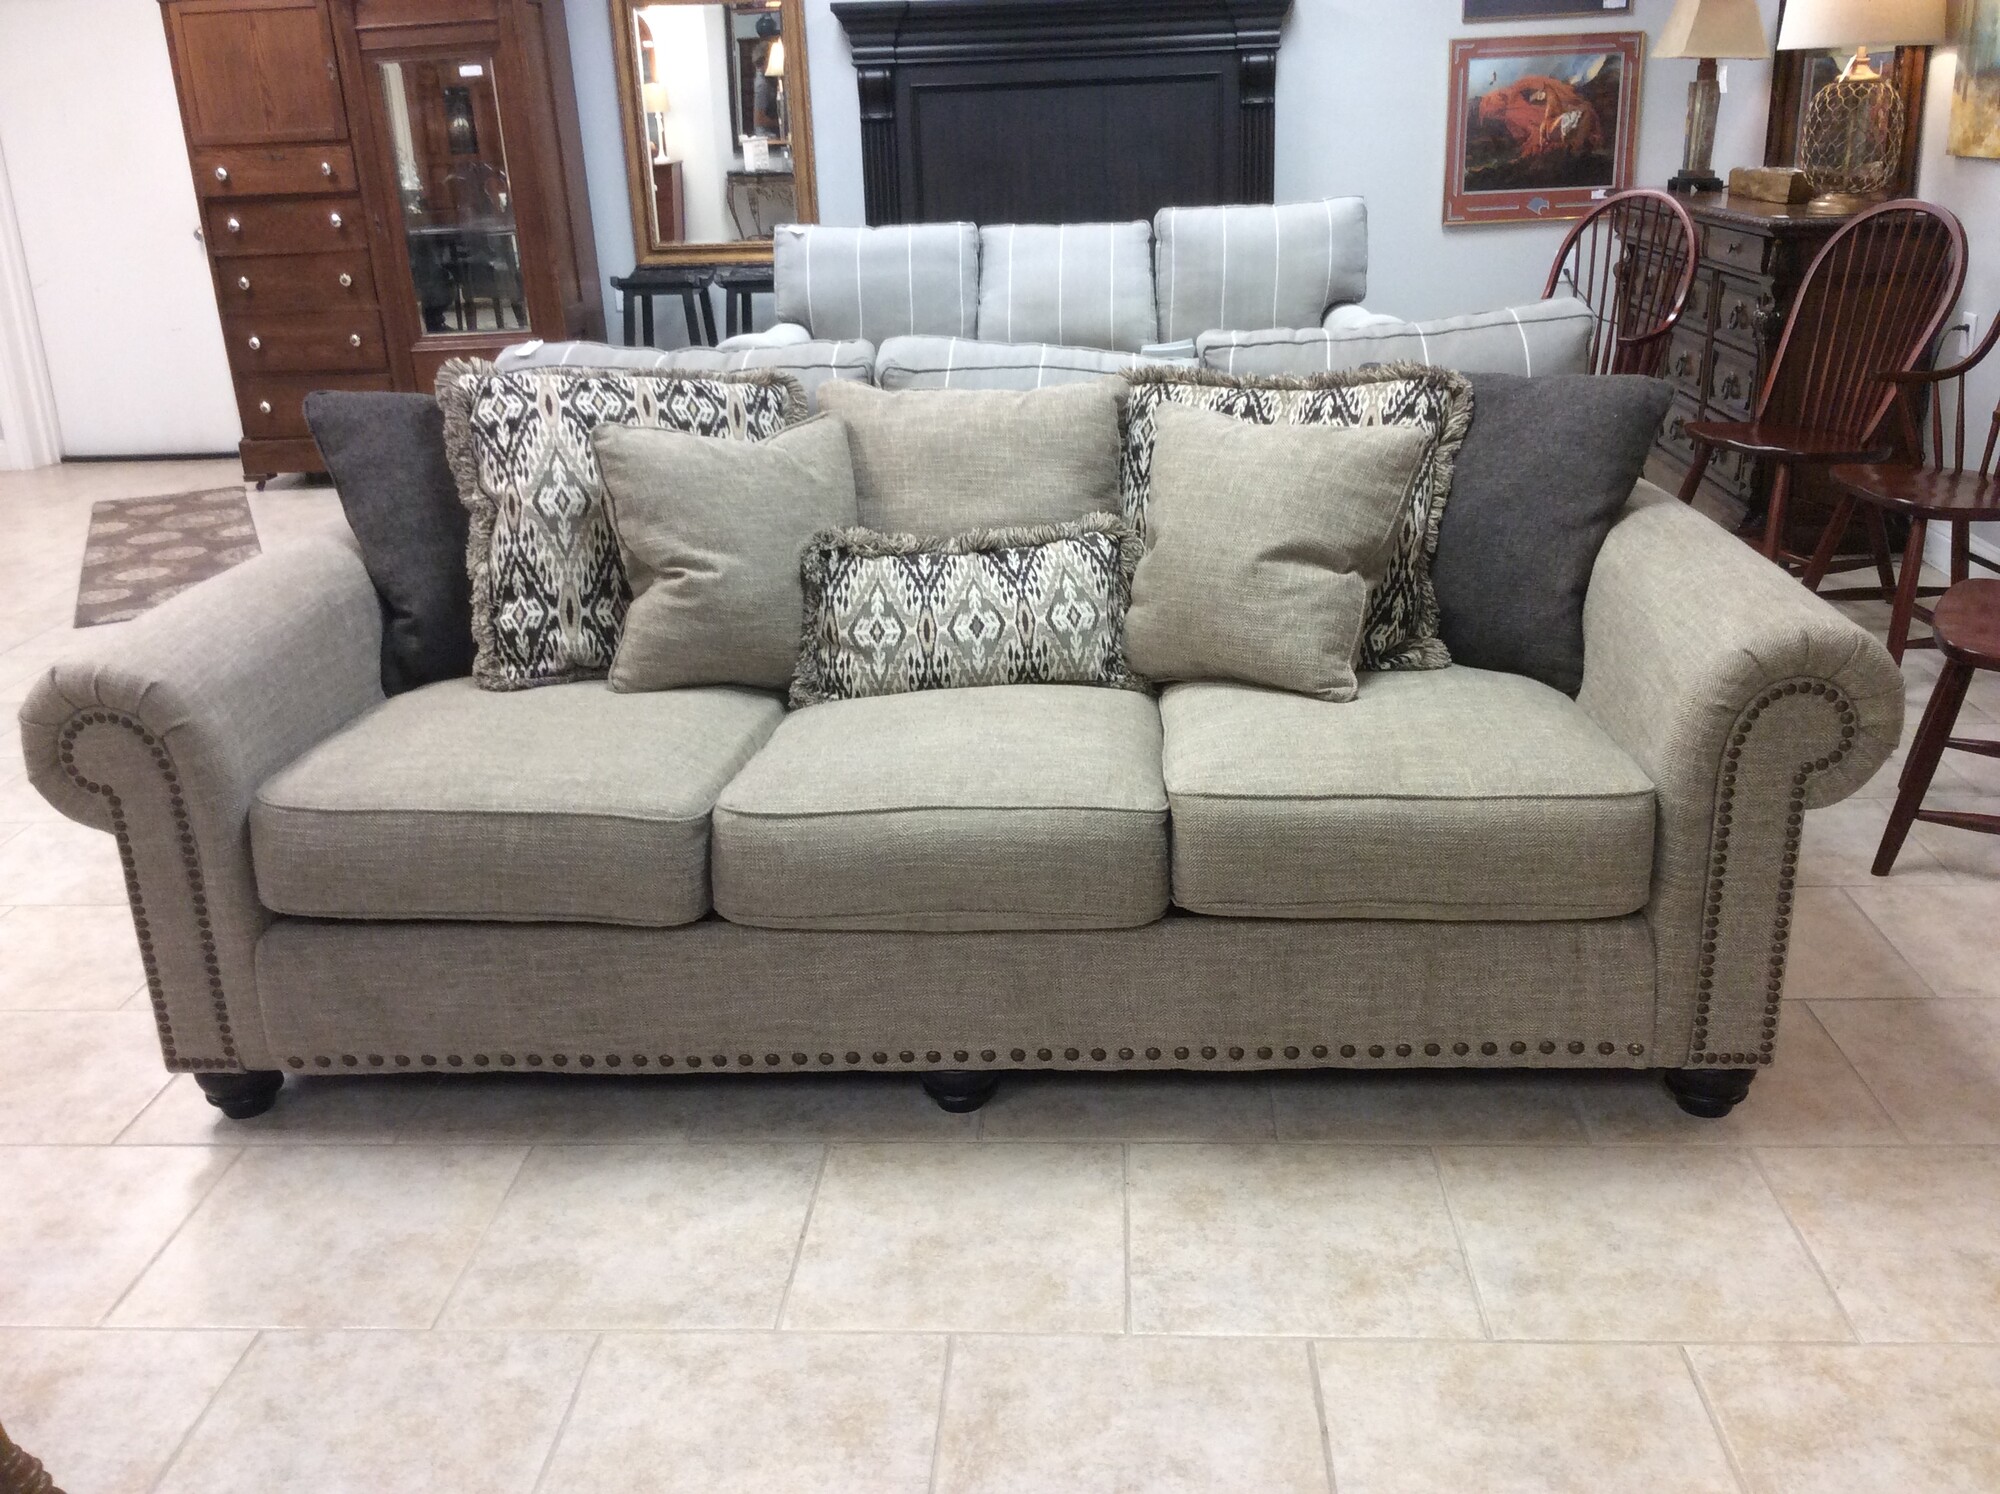 This is a Beautiful Cream Tweed 3 Seater Sofa from Ashley. This Sofa has Nailhead Trim around the arms and Dark Brown Circled Feet. This Sofa also features 8 pillows that come with the Sofa; 2 Brown, 3 Cream and 3 Patterned.